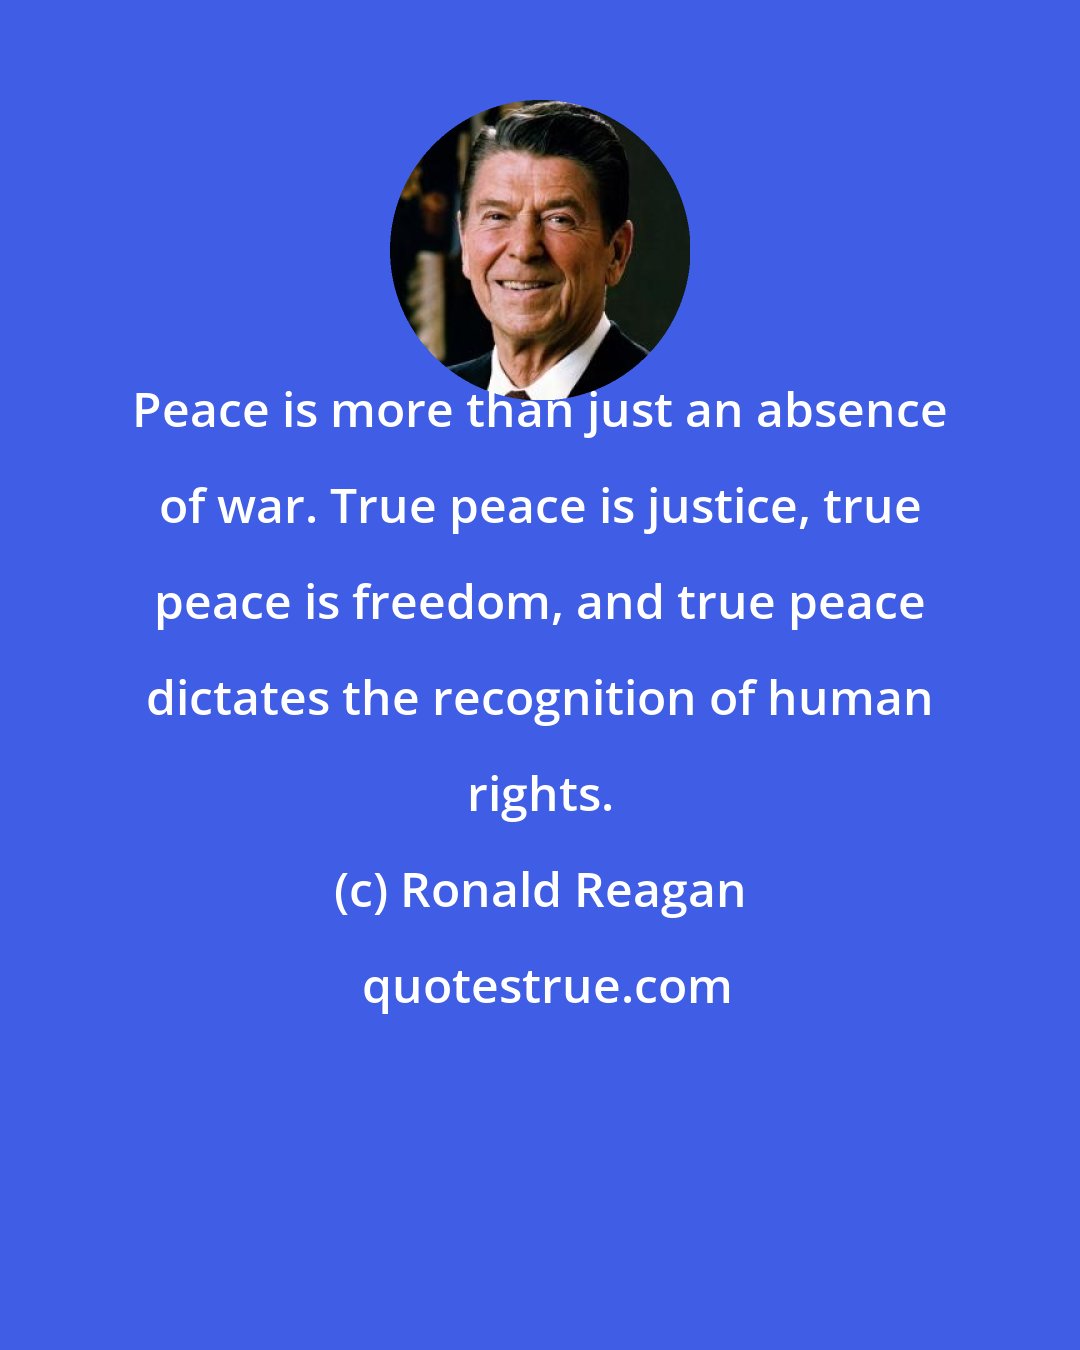 Ronald Reagan: Peace is more than just an absence of war. True peace is justice, true peace is freedom, and true peace dictates the recognition of human rights.